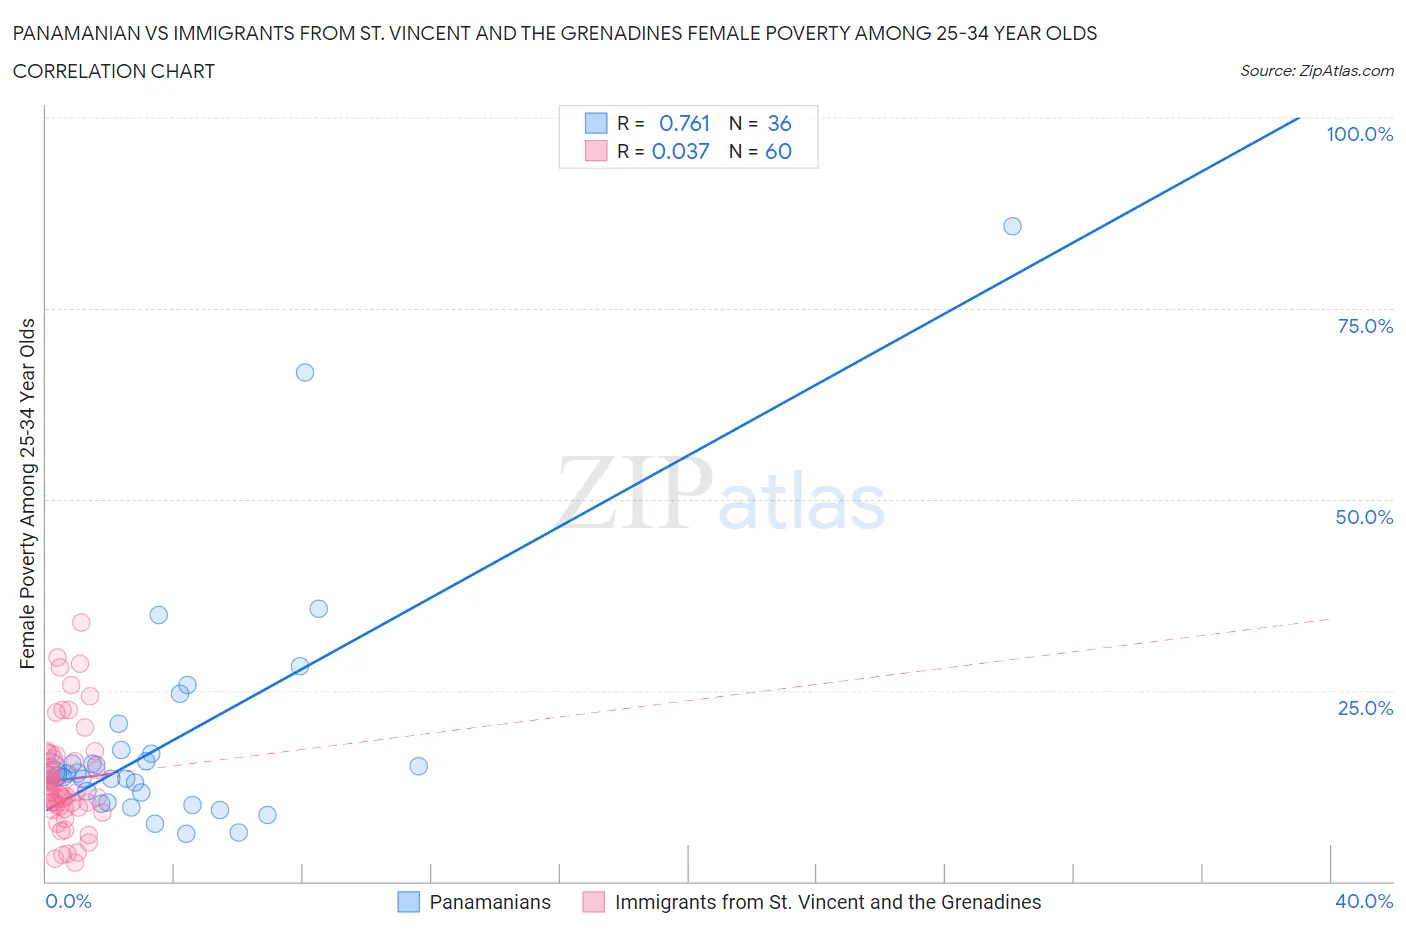 Panamanian vs Immigrants from St. Vincent and the Grenadines Female Poverty Among 25-34 Year Olds